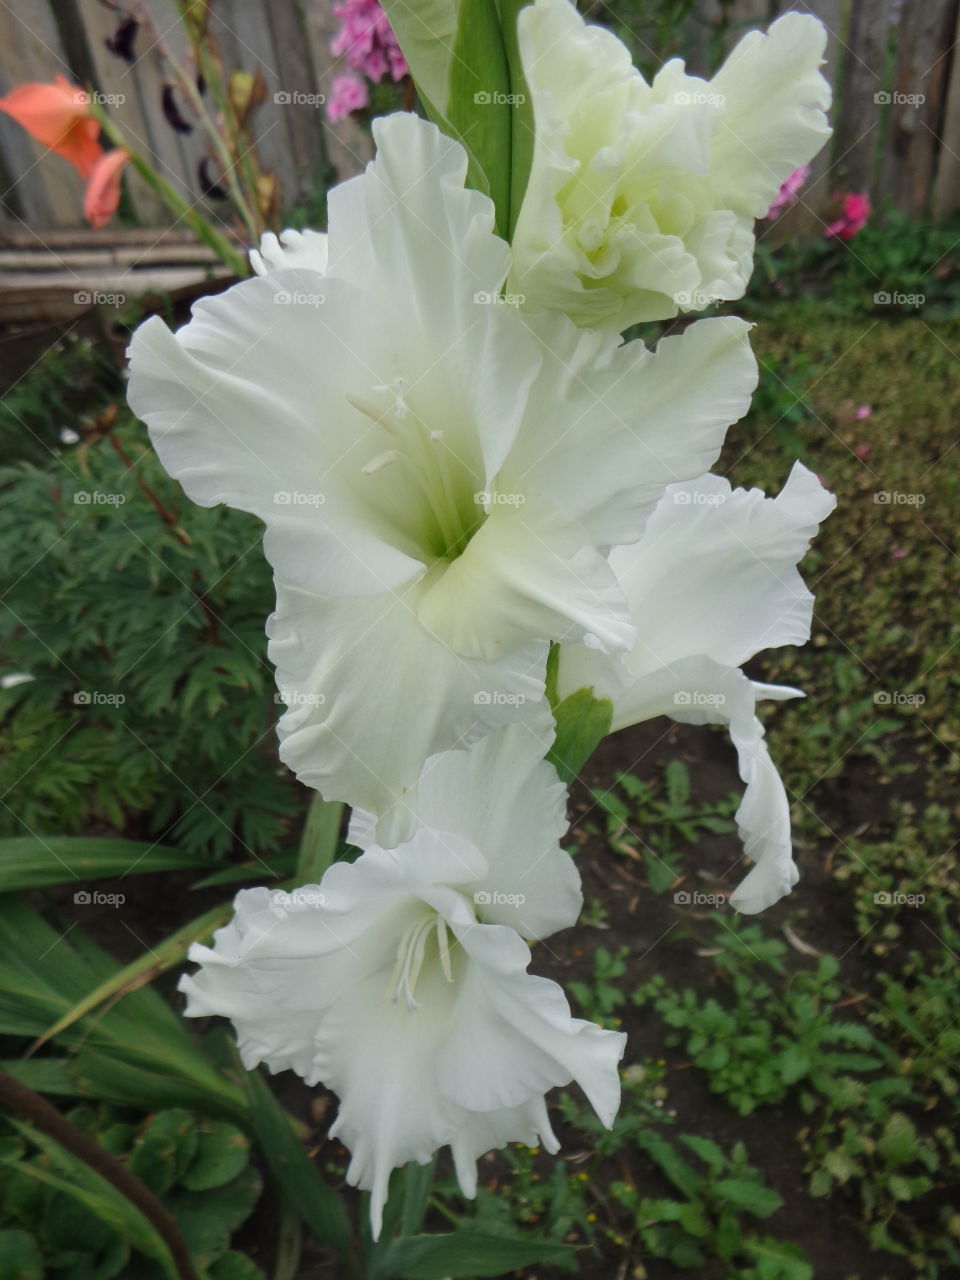 The Flower of Gladiolus